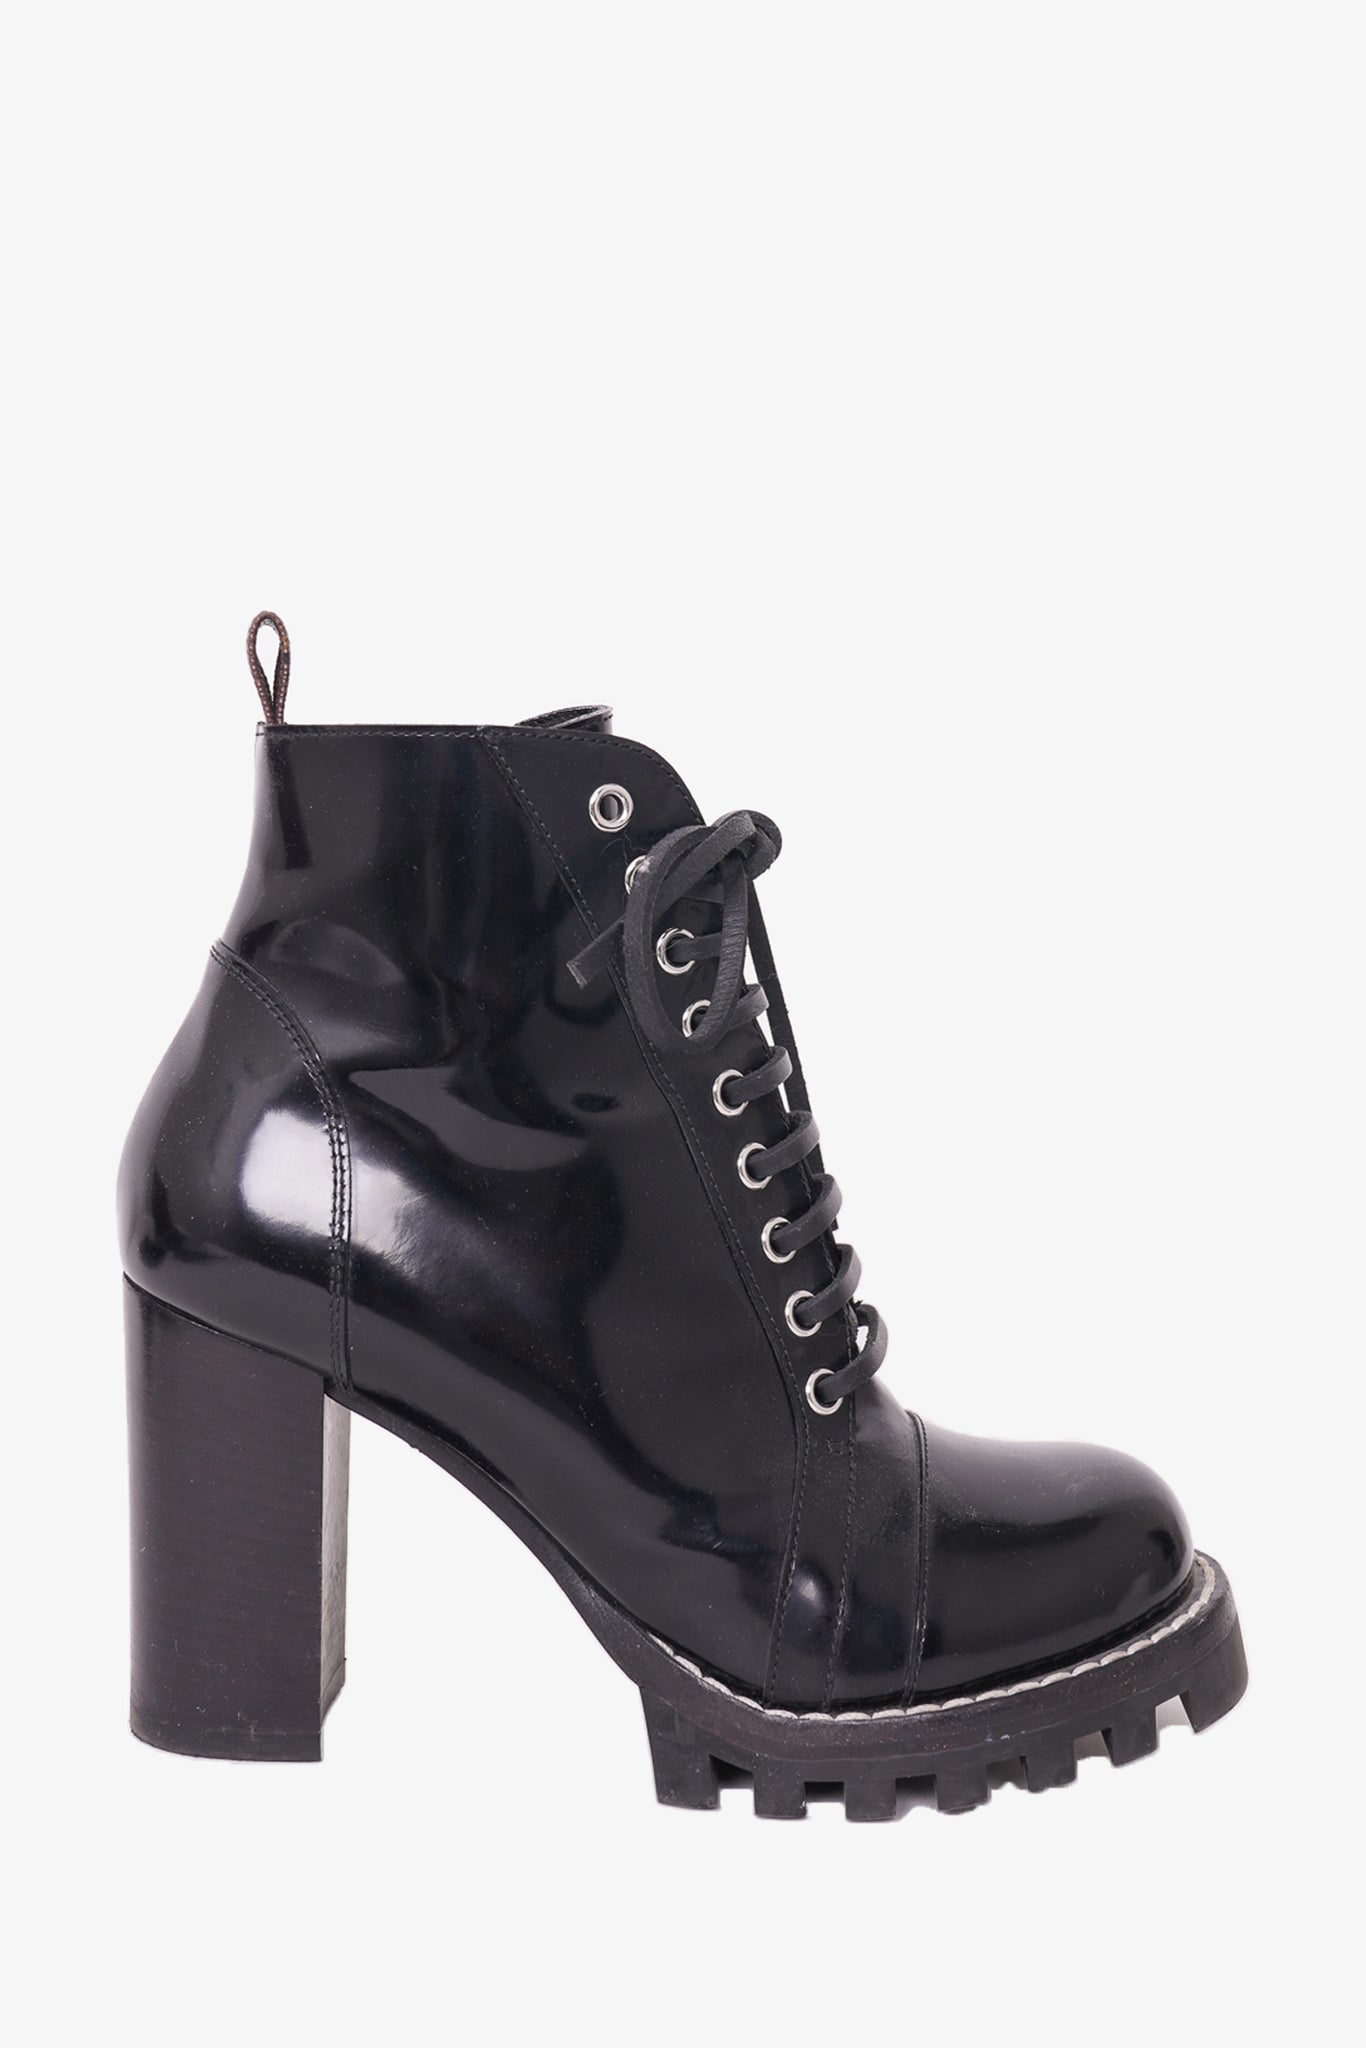 Chanel Black Leather Ankle Boots With CC Patent Cap Toe Size 38.5 – Mine &  Yours